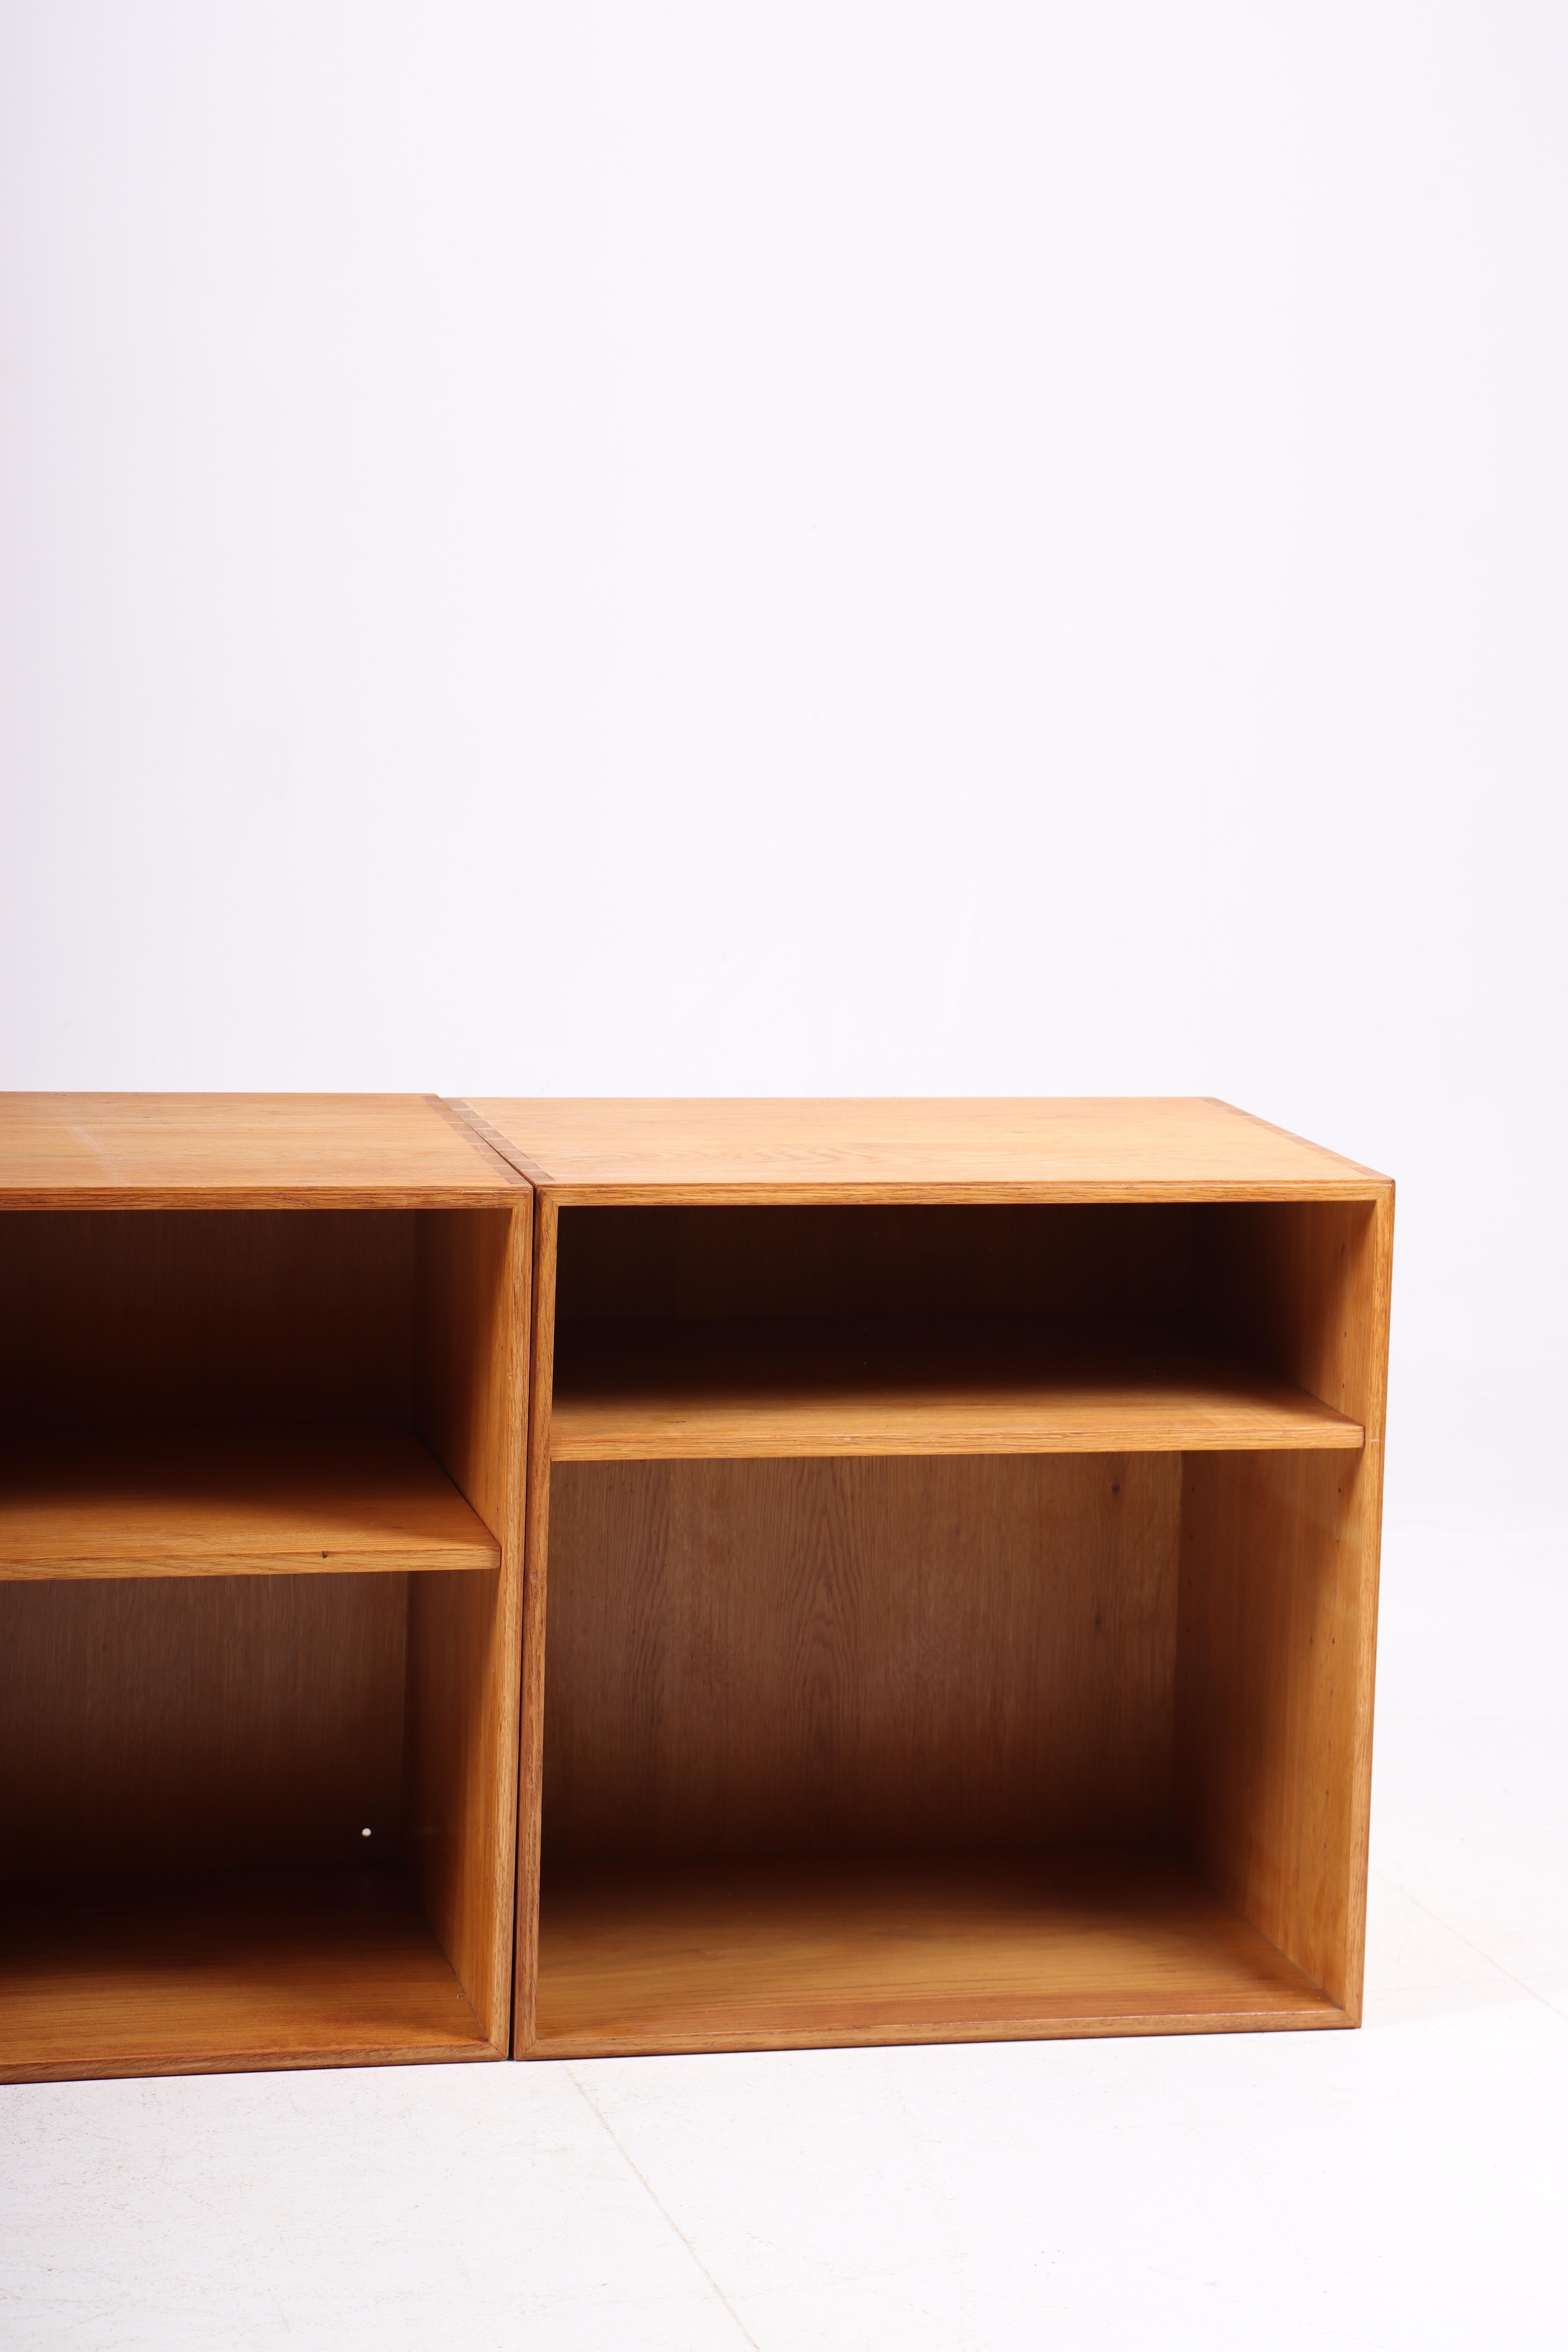 Danish Set of Four Wall-Mounted Bookcases in Solid Oak, Made in Denmark 1960s For Sale